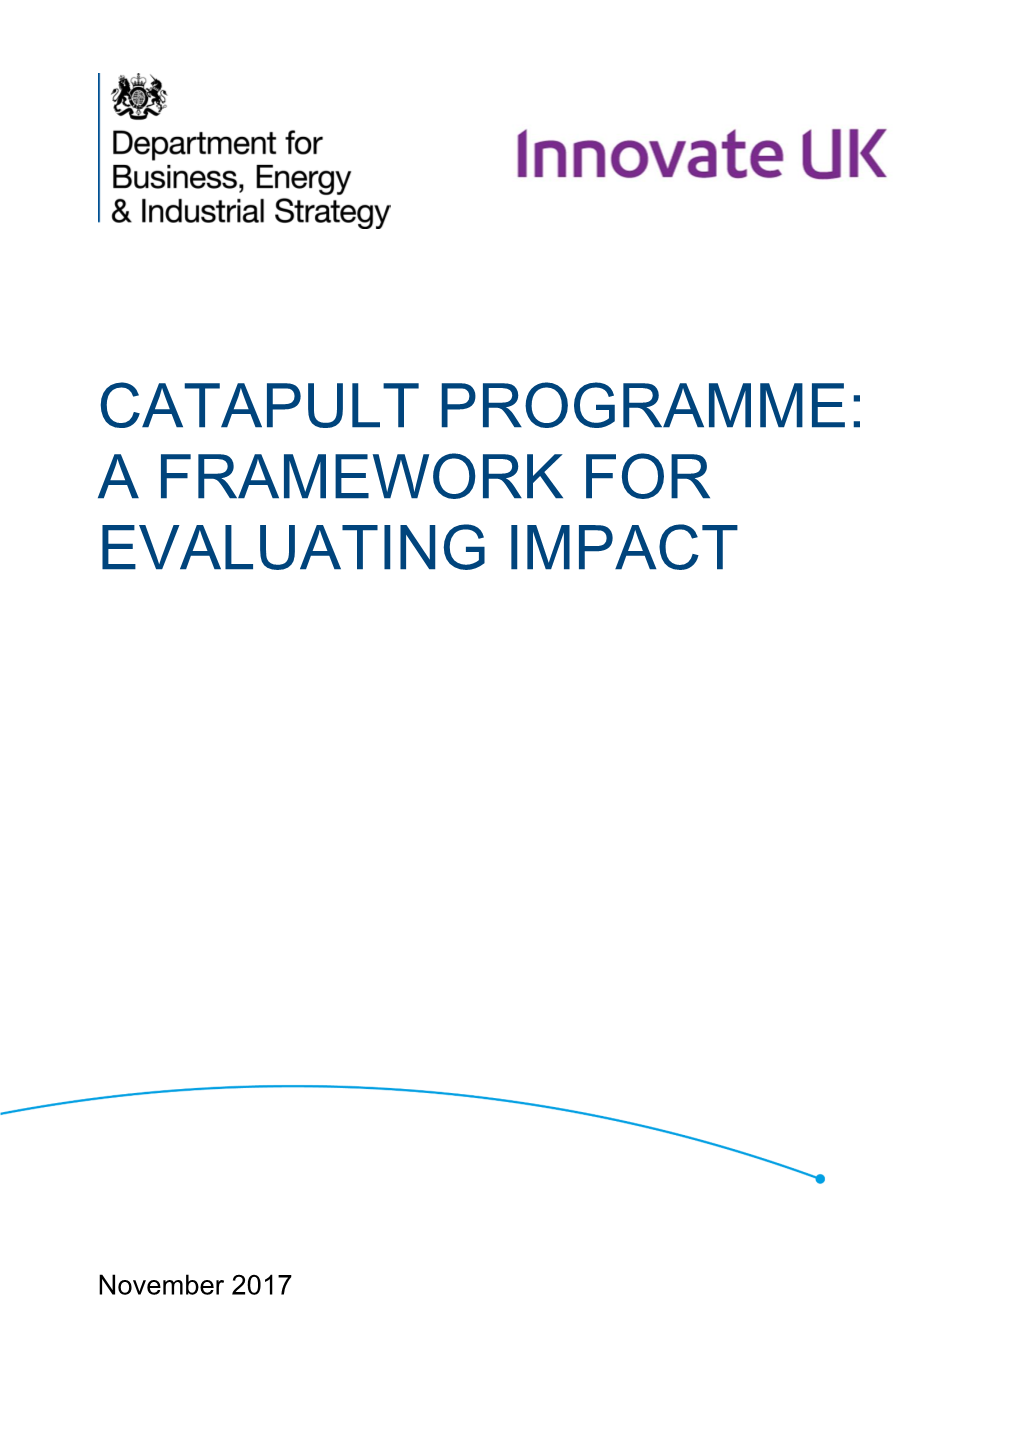 Catapult Programme: a Framework for Evaluating Impact